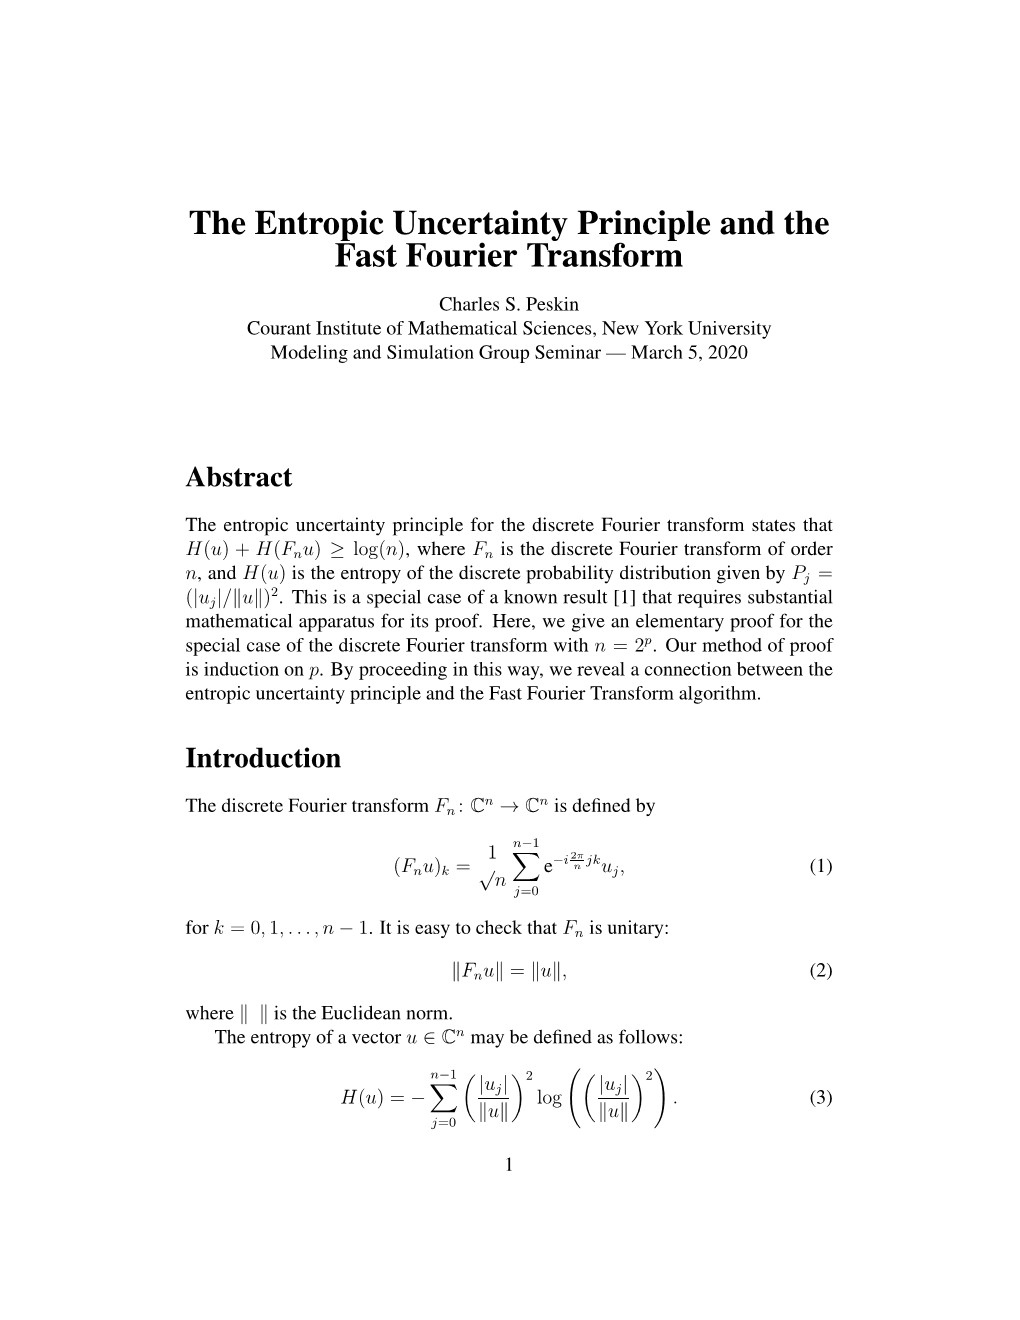 The Entropic Uncertainty Principle and the Fast Fourier Transform